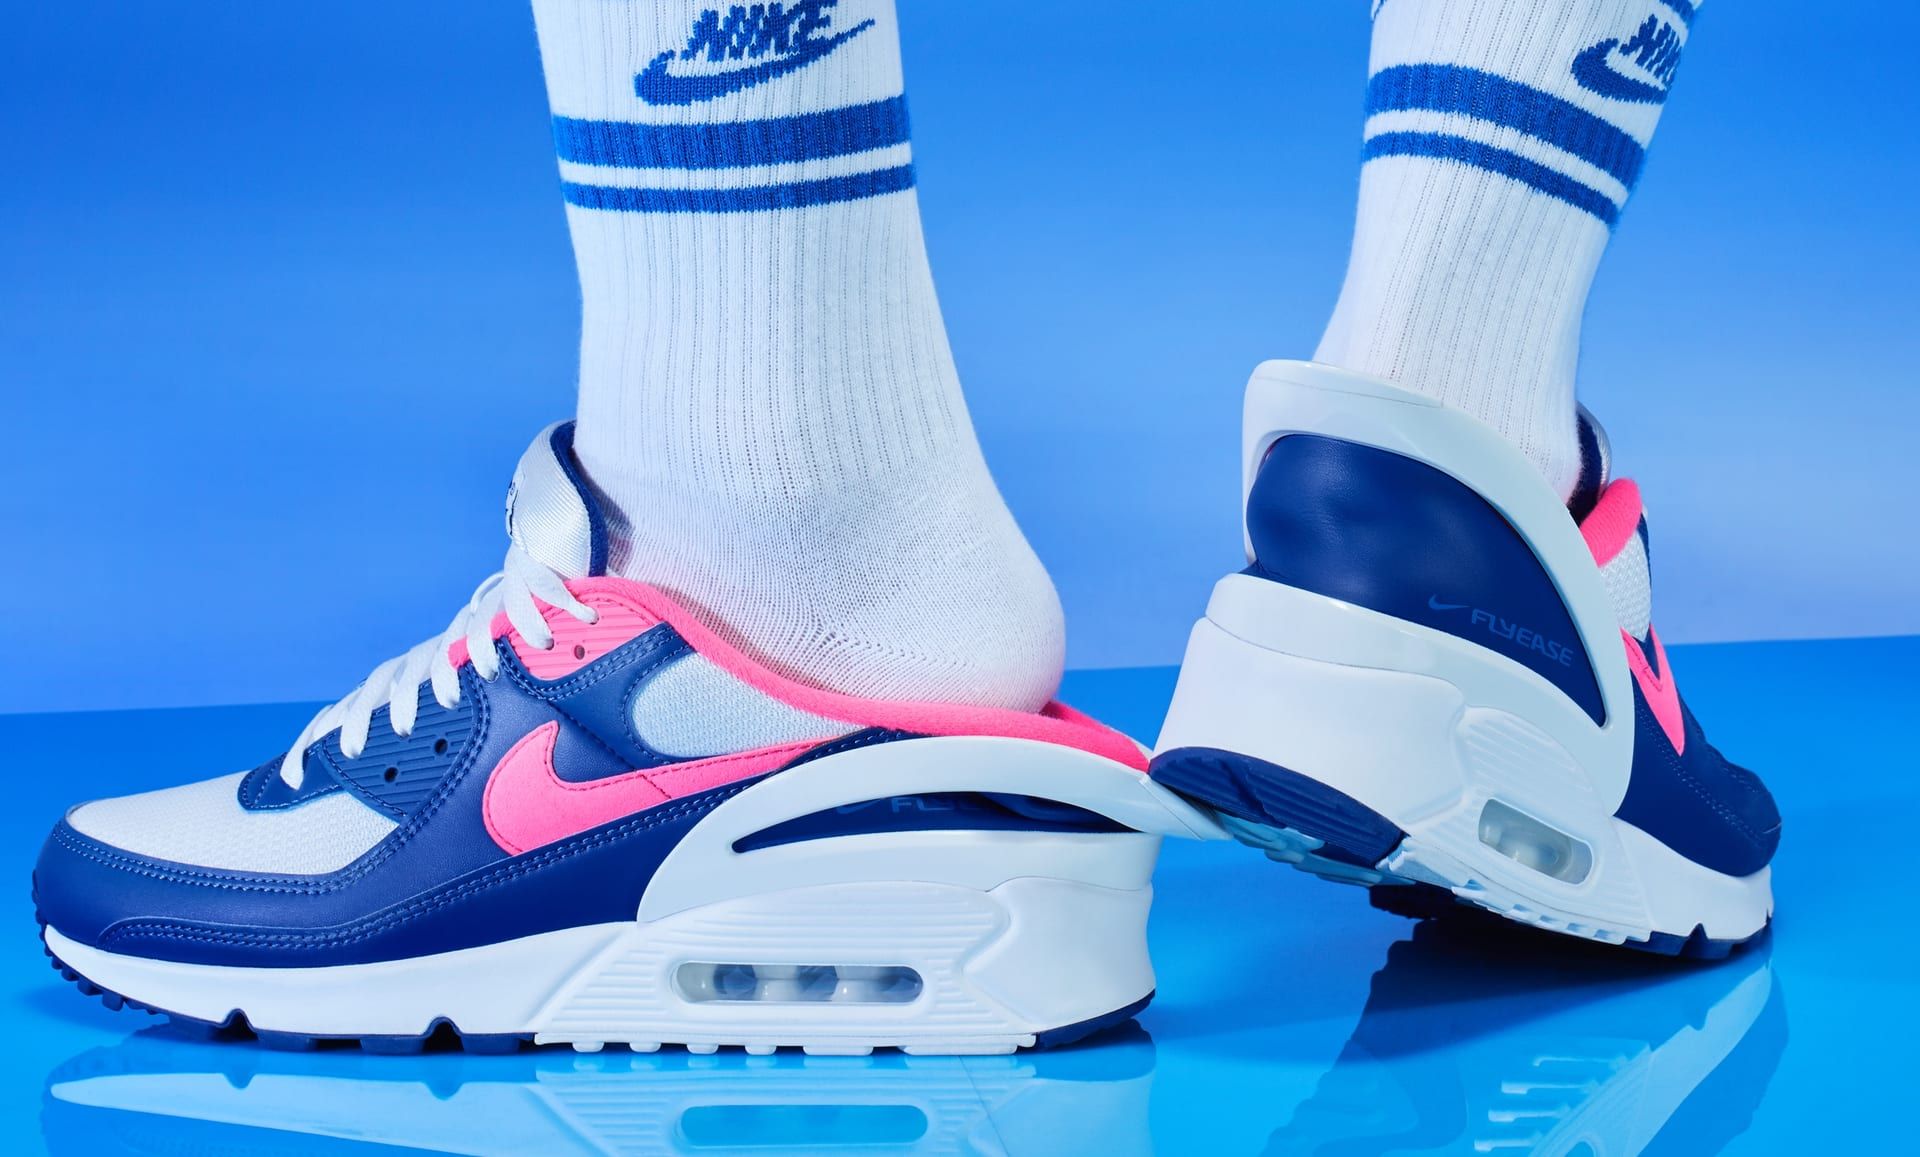 Nike Air Max 90 FlyEase Sneakers Have a Cool Collapsable Heel